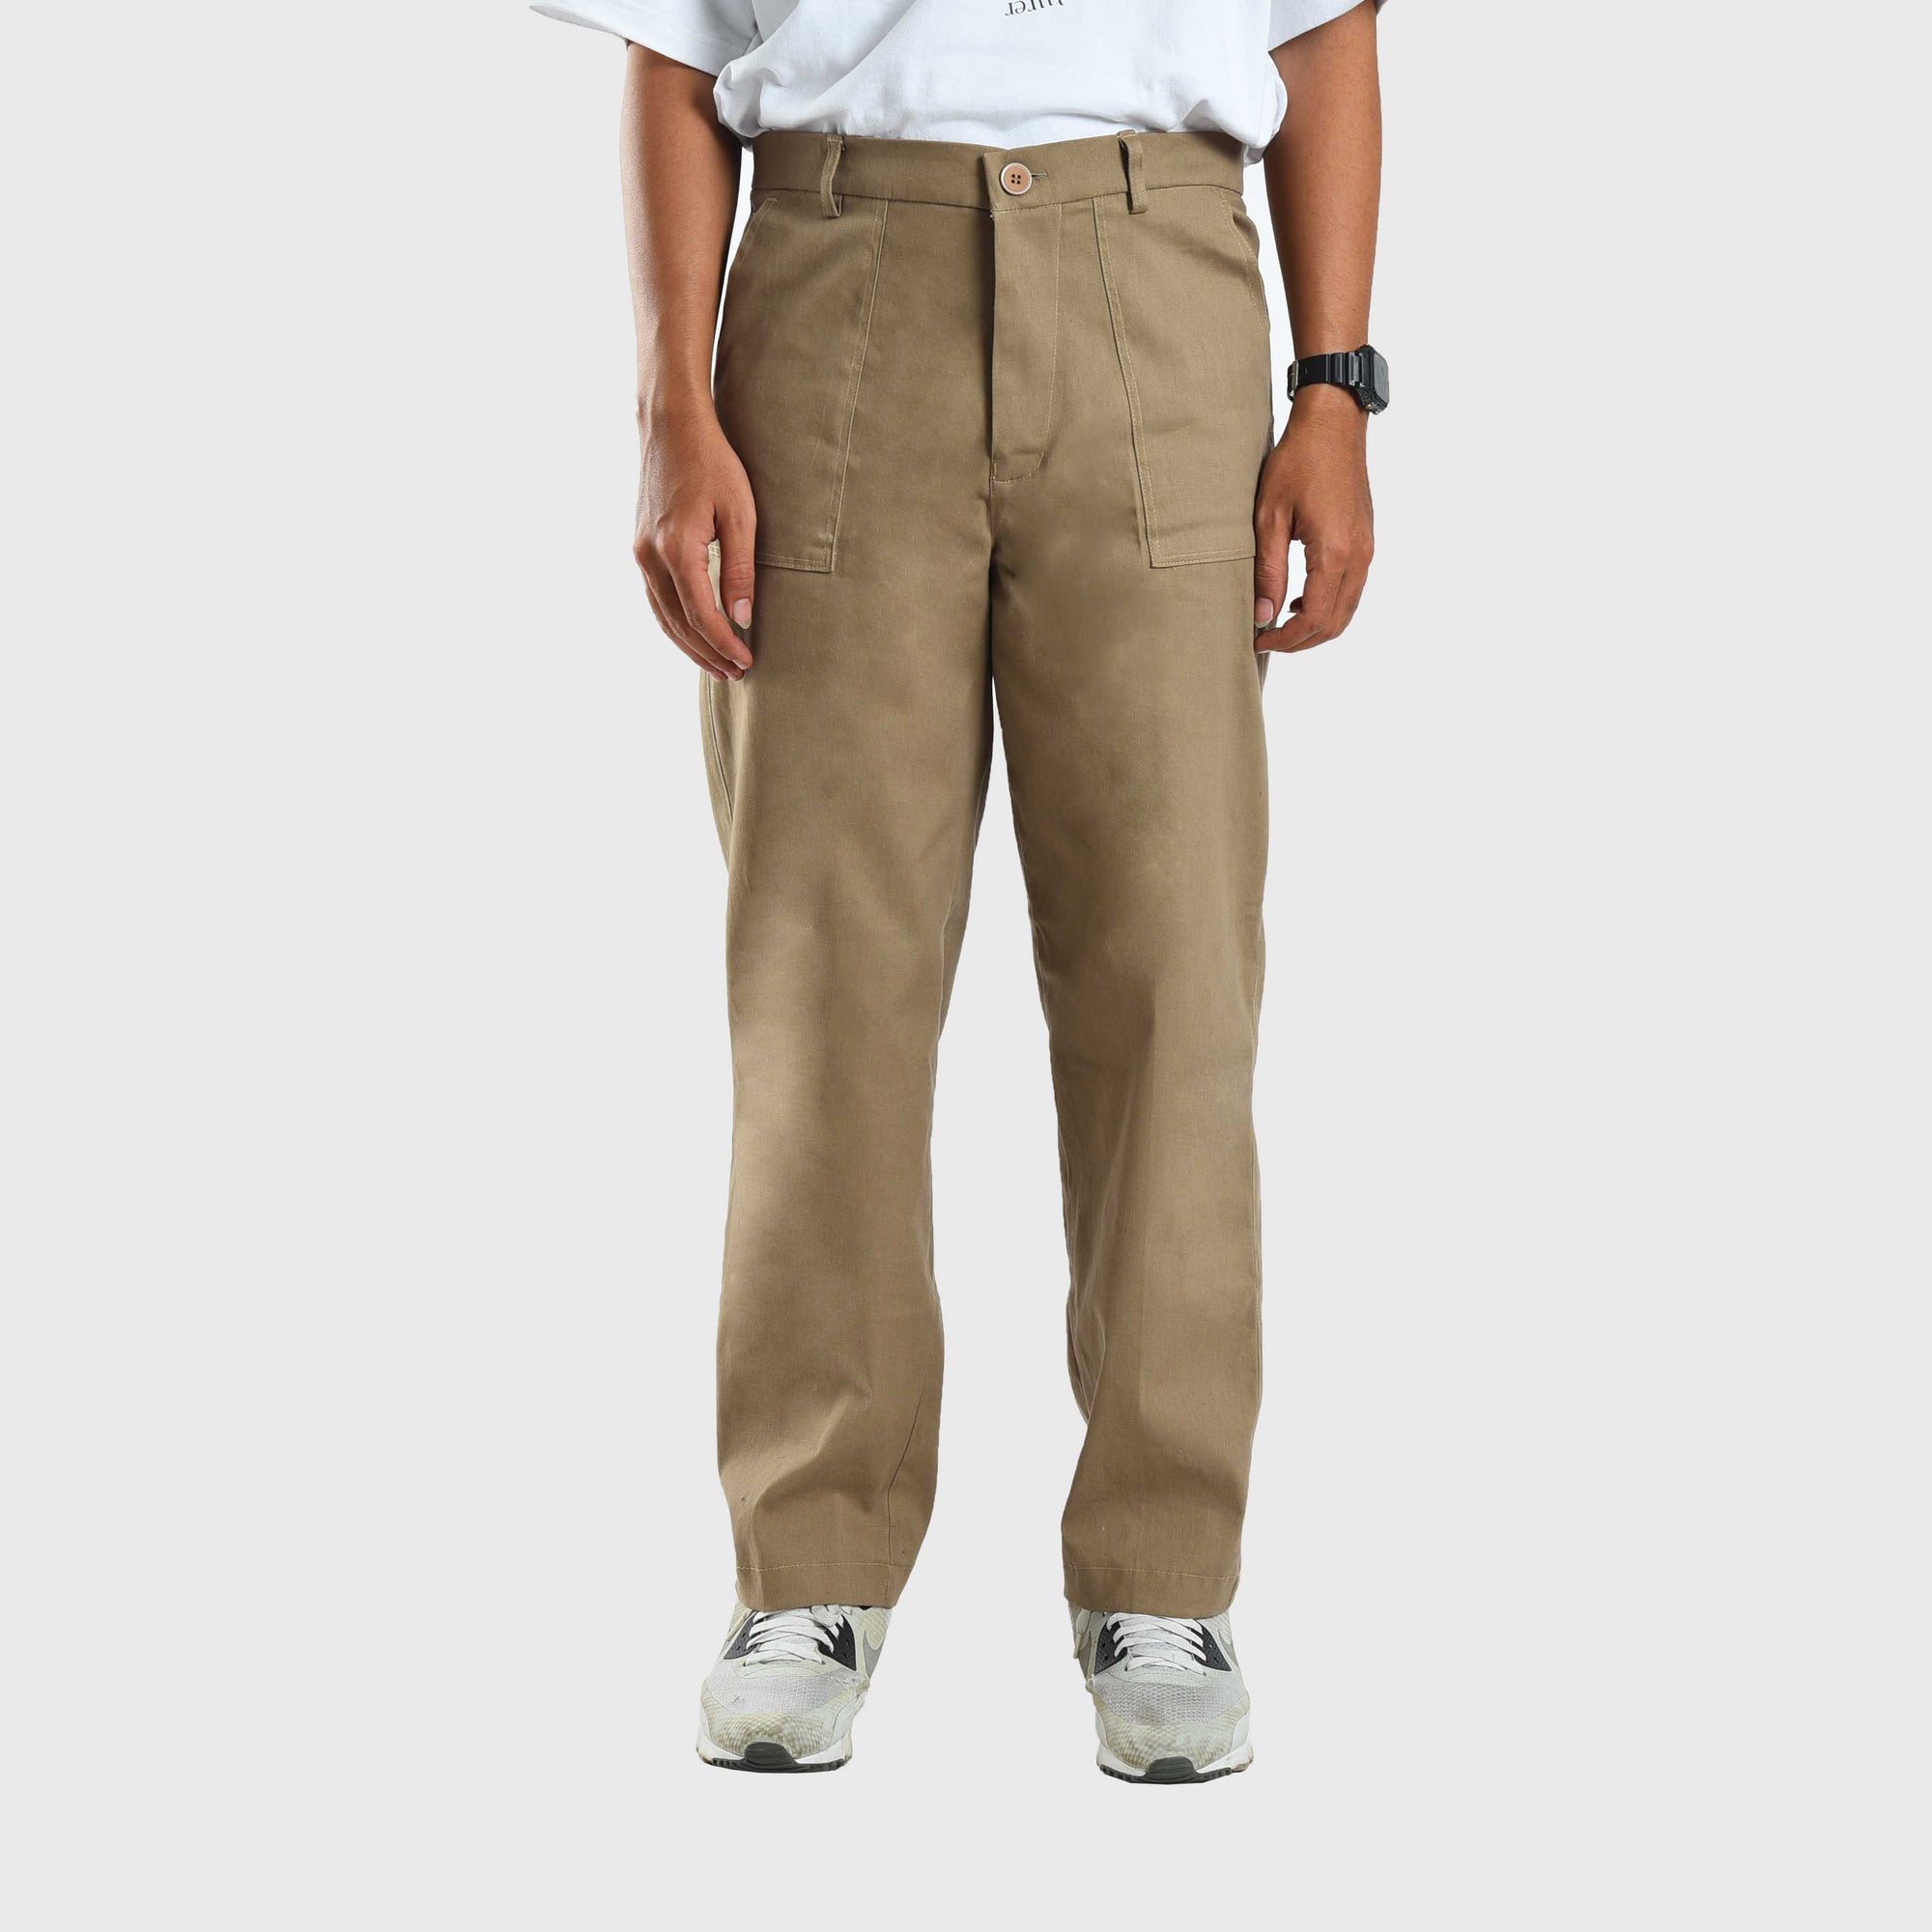 Roughneck C030 Dennery Fatigue Pants